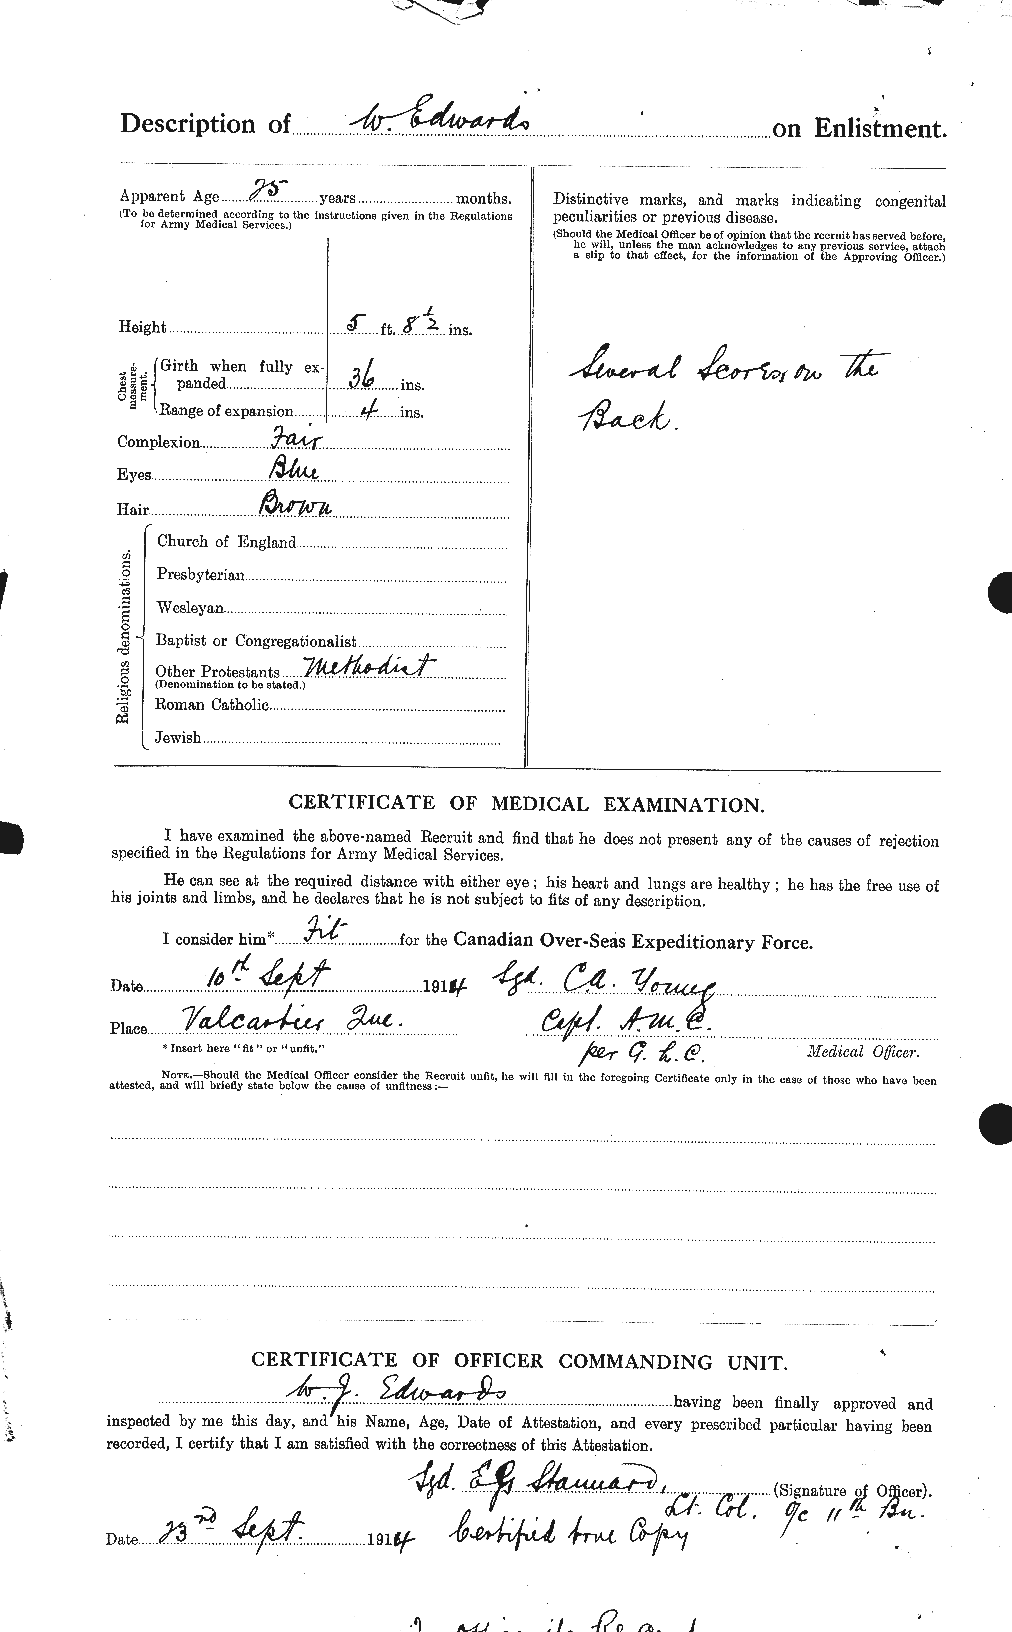 Personnel Records of the First World War - CEF 311919b